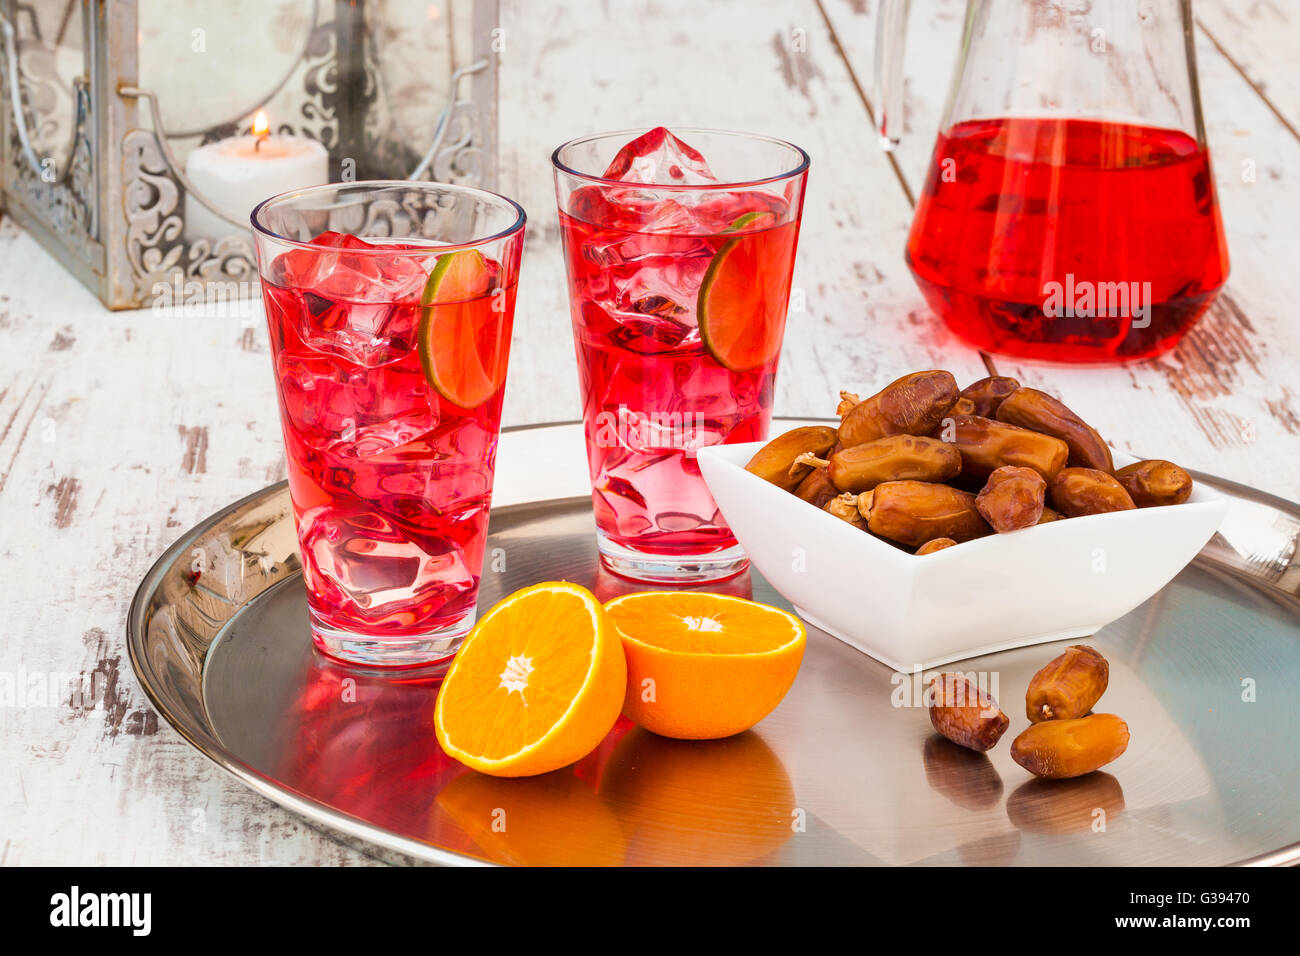 Cold refreshing syrup drink, sweet dates and fruit for iftar break fast during fasting month of Ramadan. Stock Photo